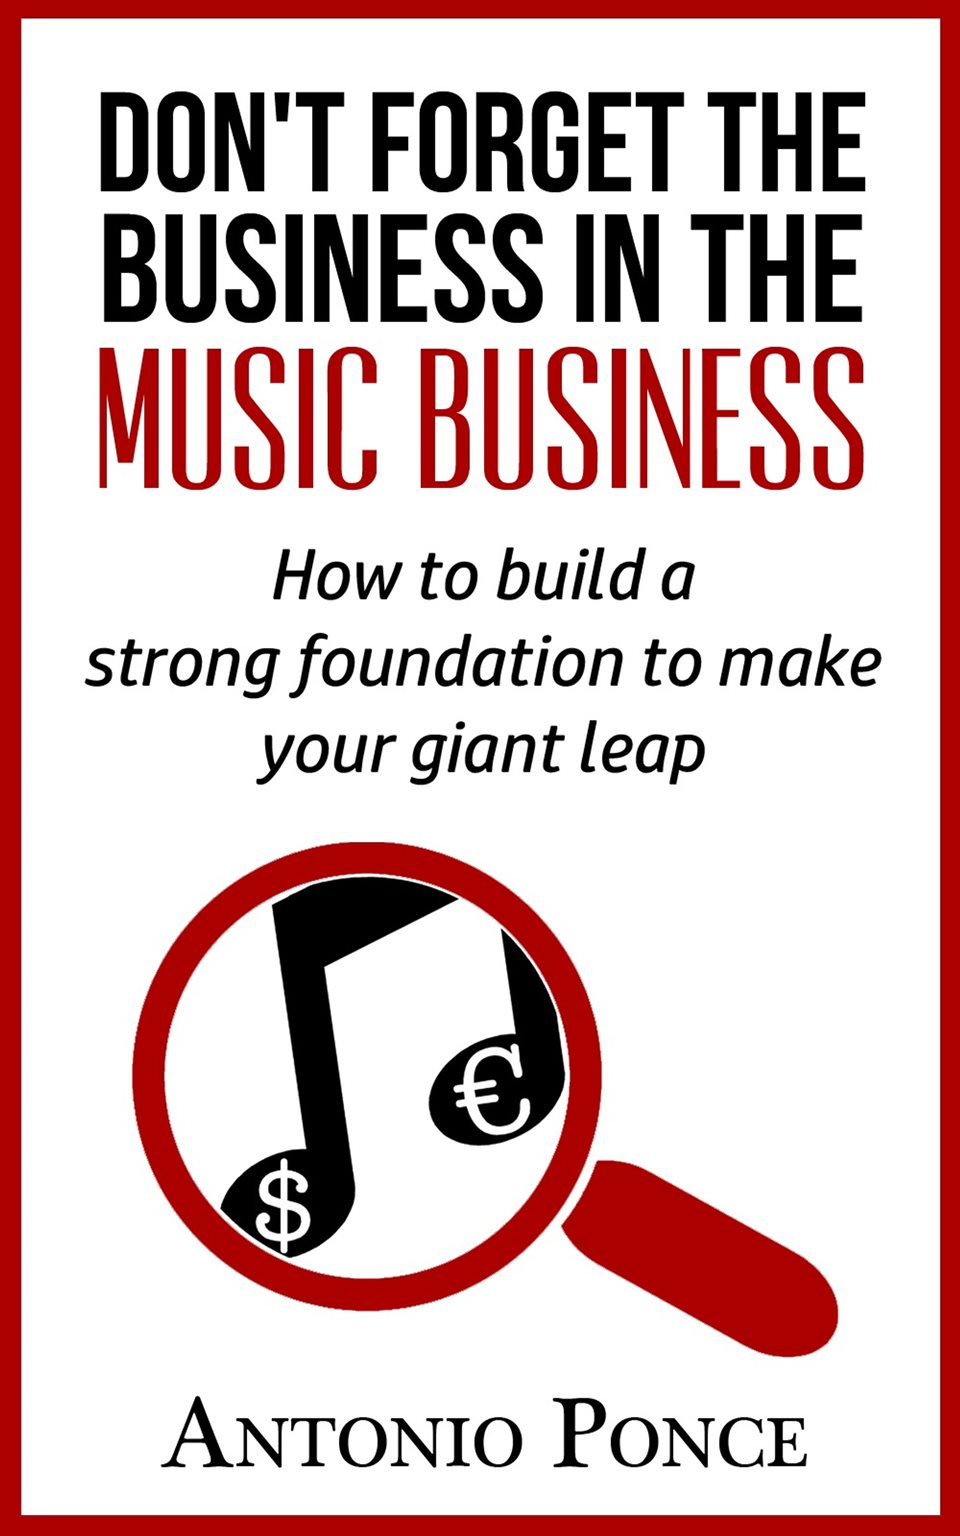 Don't Forget The Musiness In The Music Business